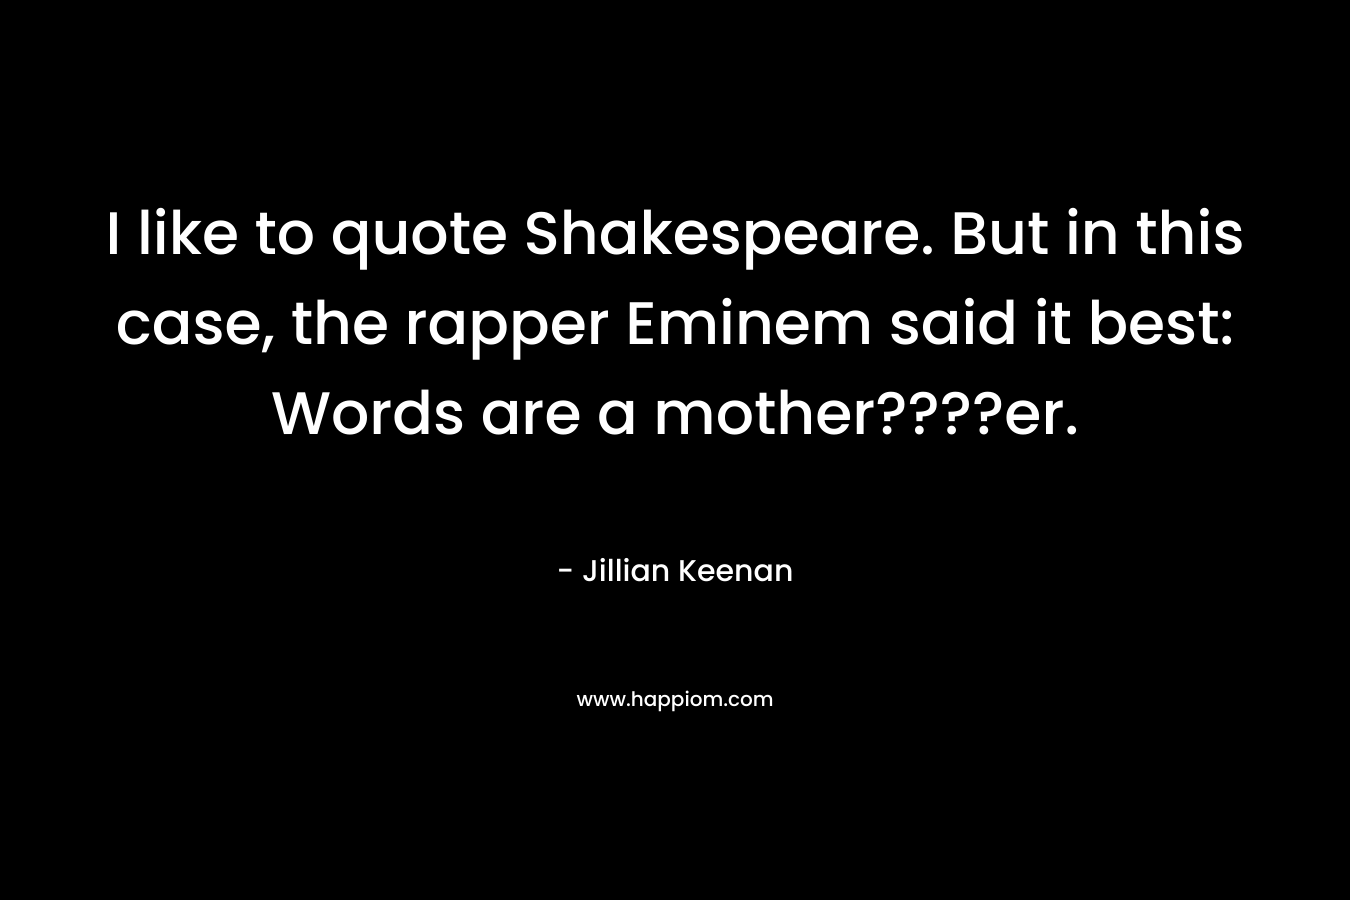 I like to quote Shakespeare. But in this case, the rapper Eminem said it best: Words are a mother????er. – Jillian Keenan